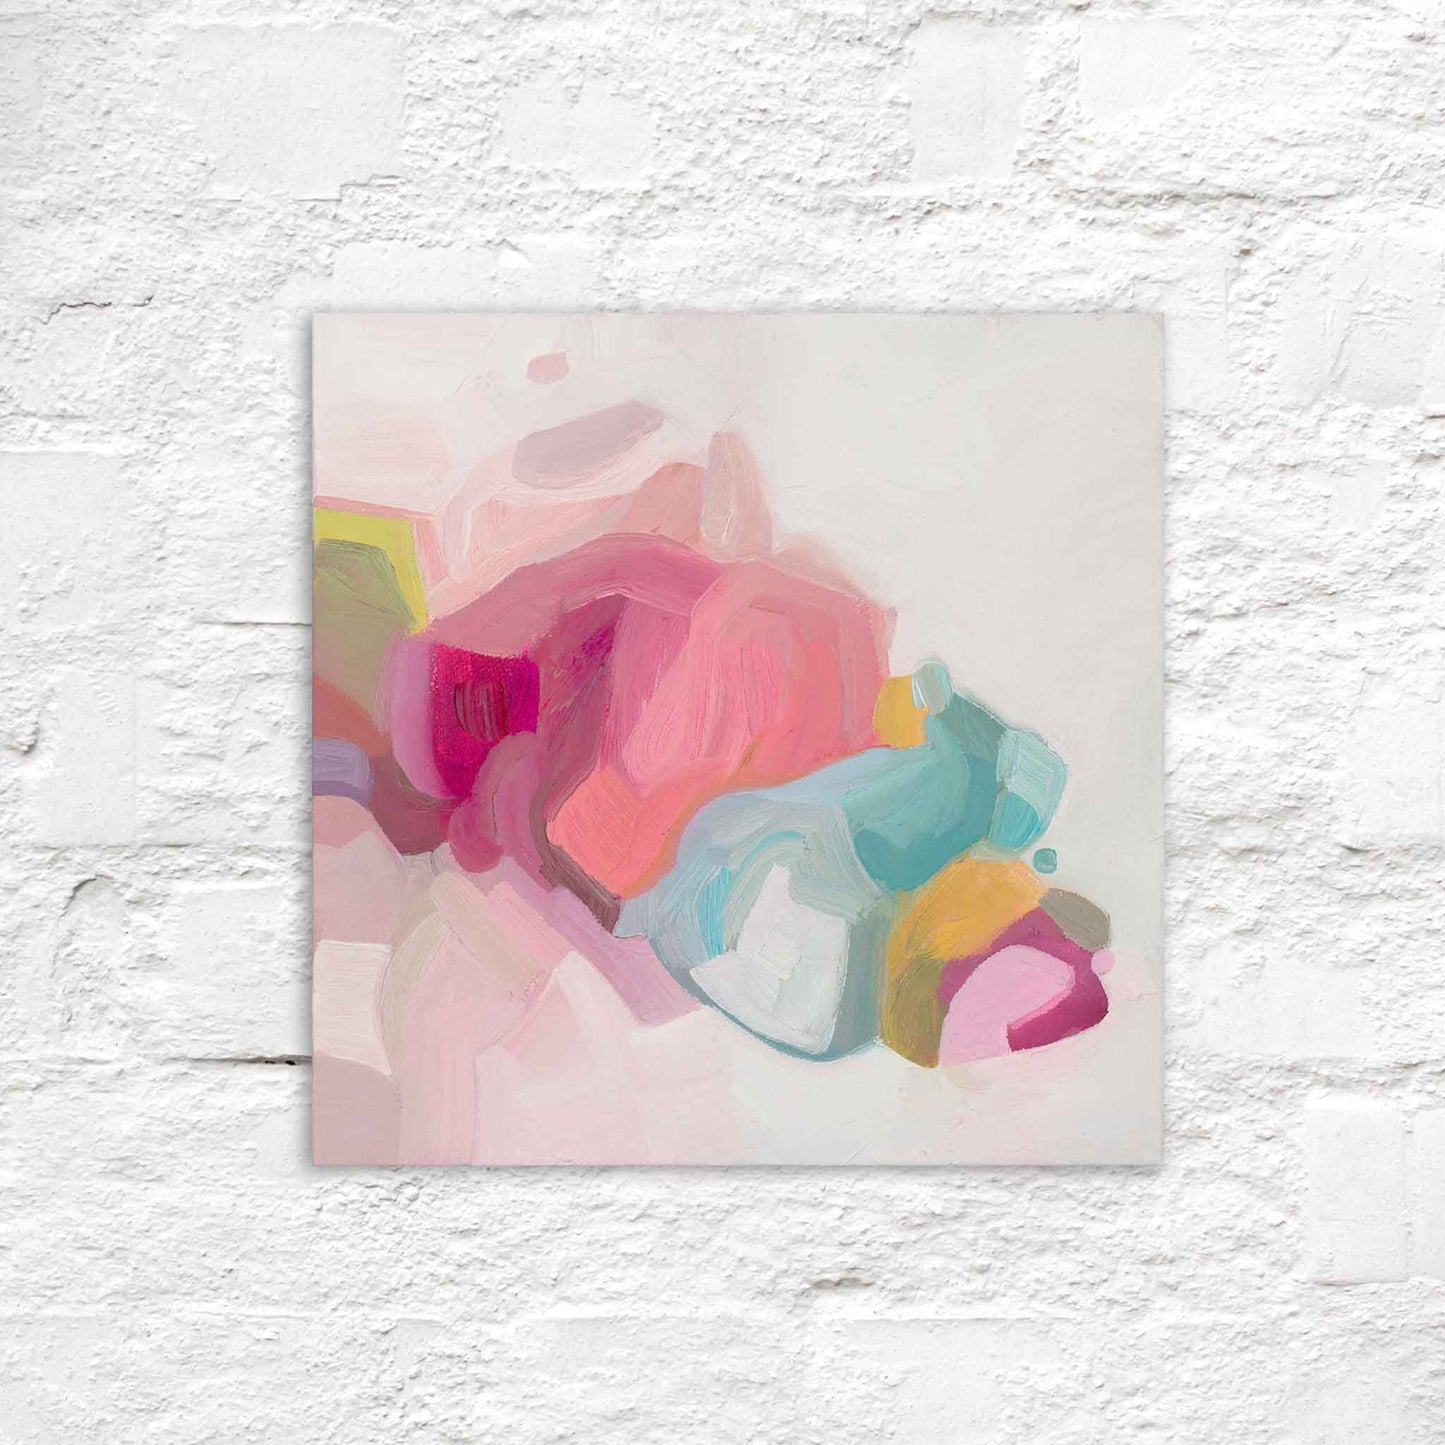 small square abstract oil painting on canvas in soft pink light turquoise and mauve pastel colors